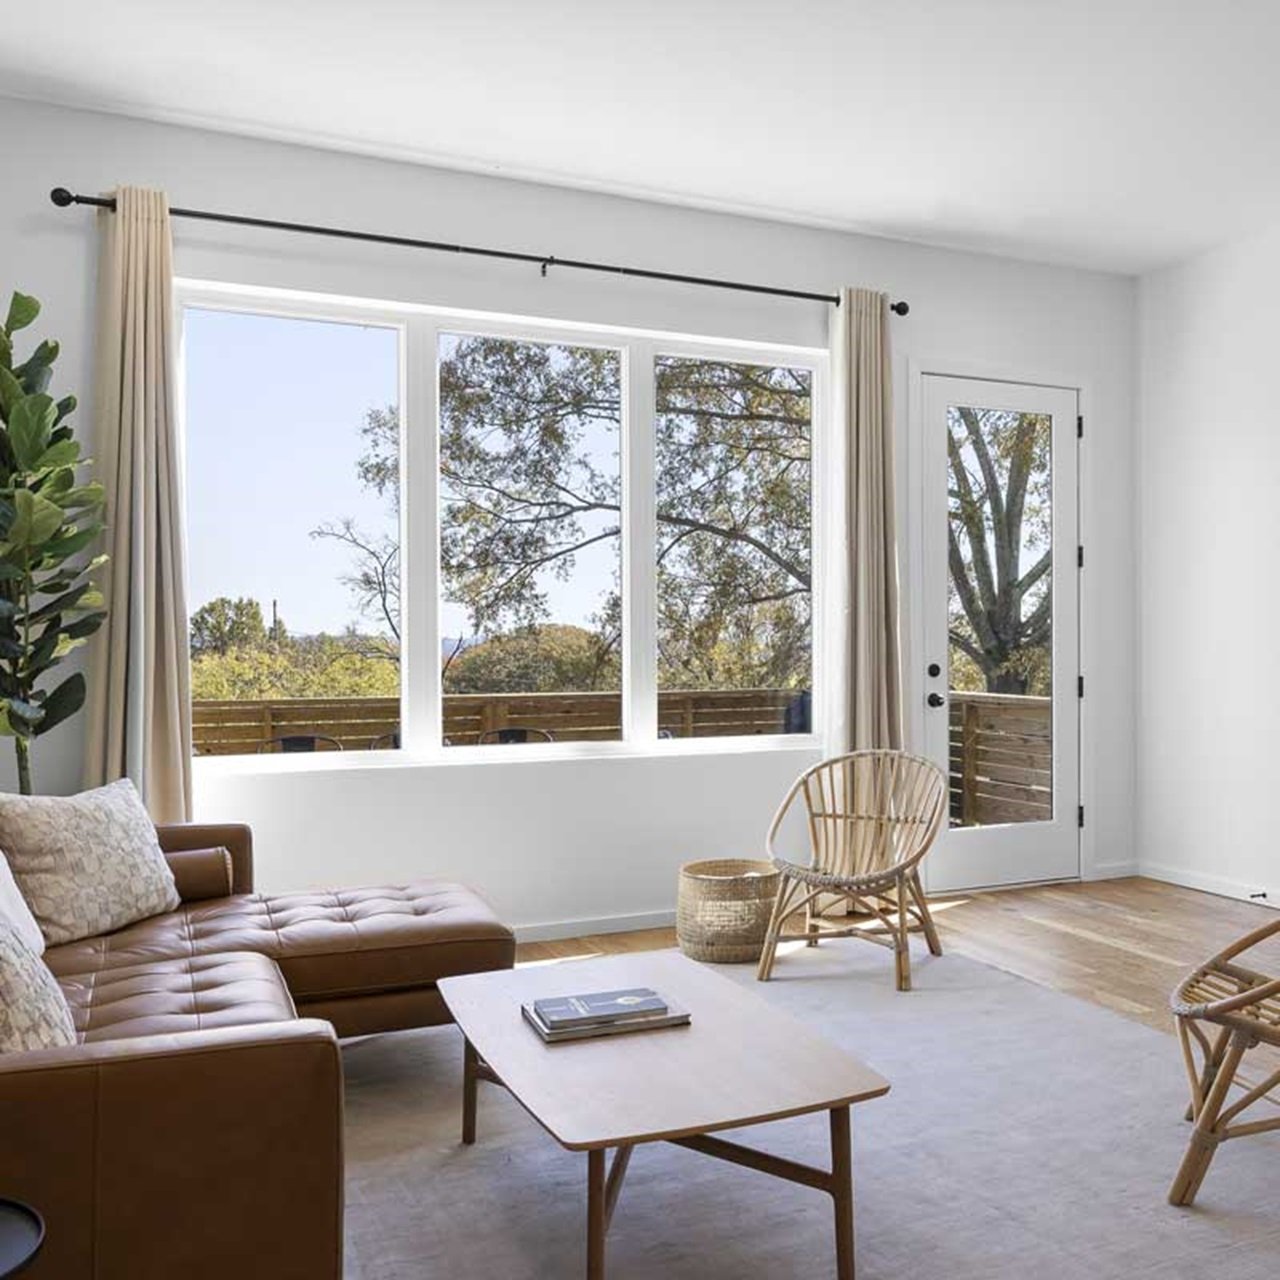 A spacious modern living room with an Essential casement picture window and a brown leather couch